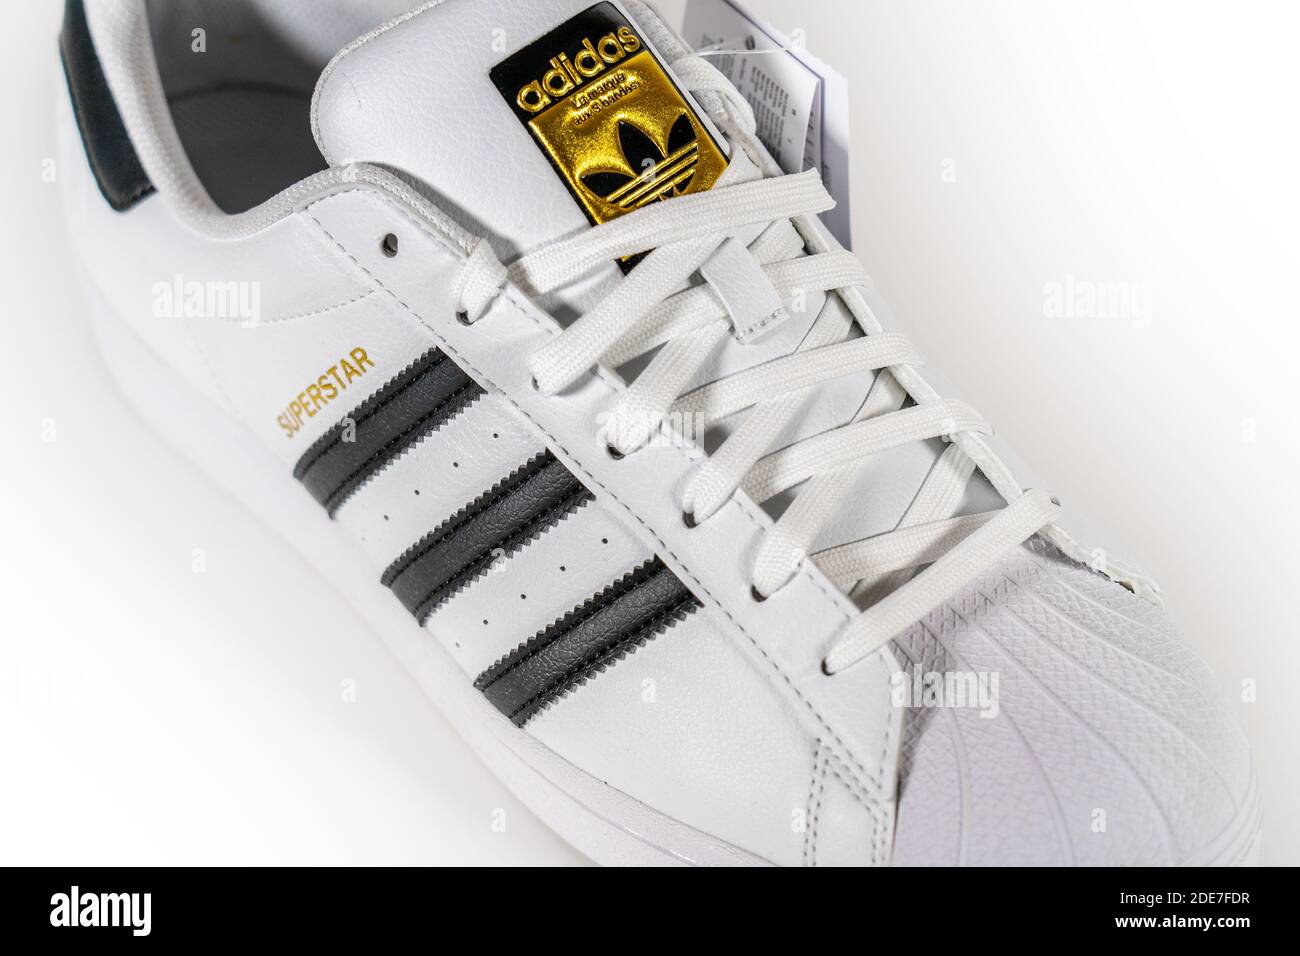 Adidas shoe High Resolution Stock Photography and Images - Alamy